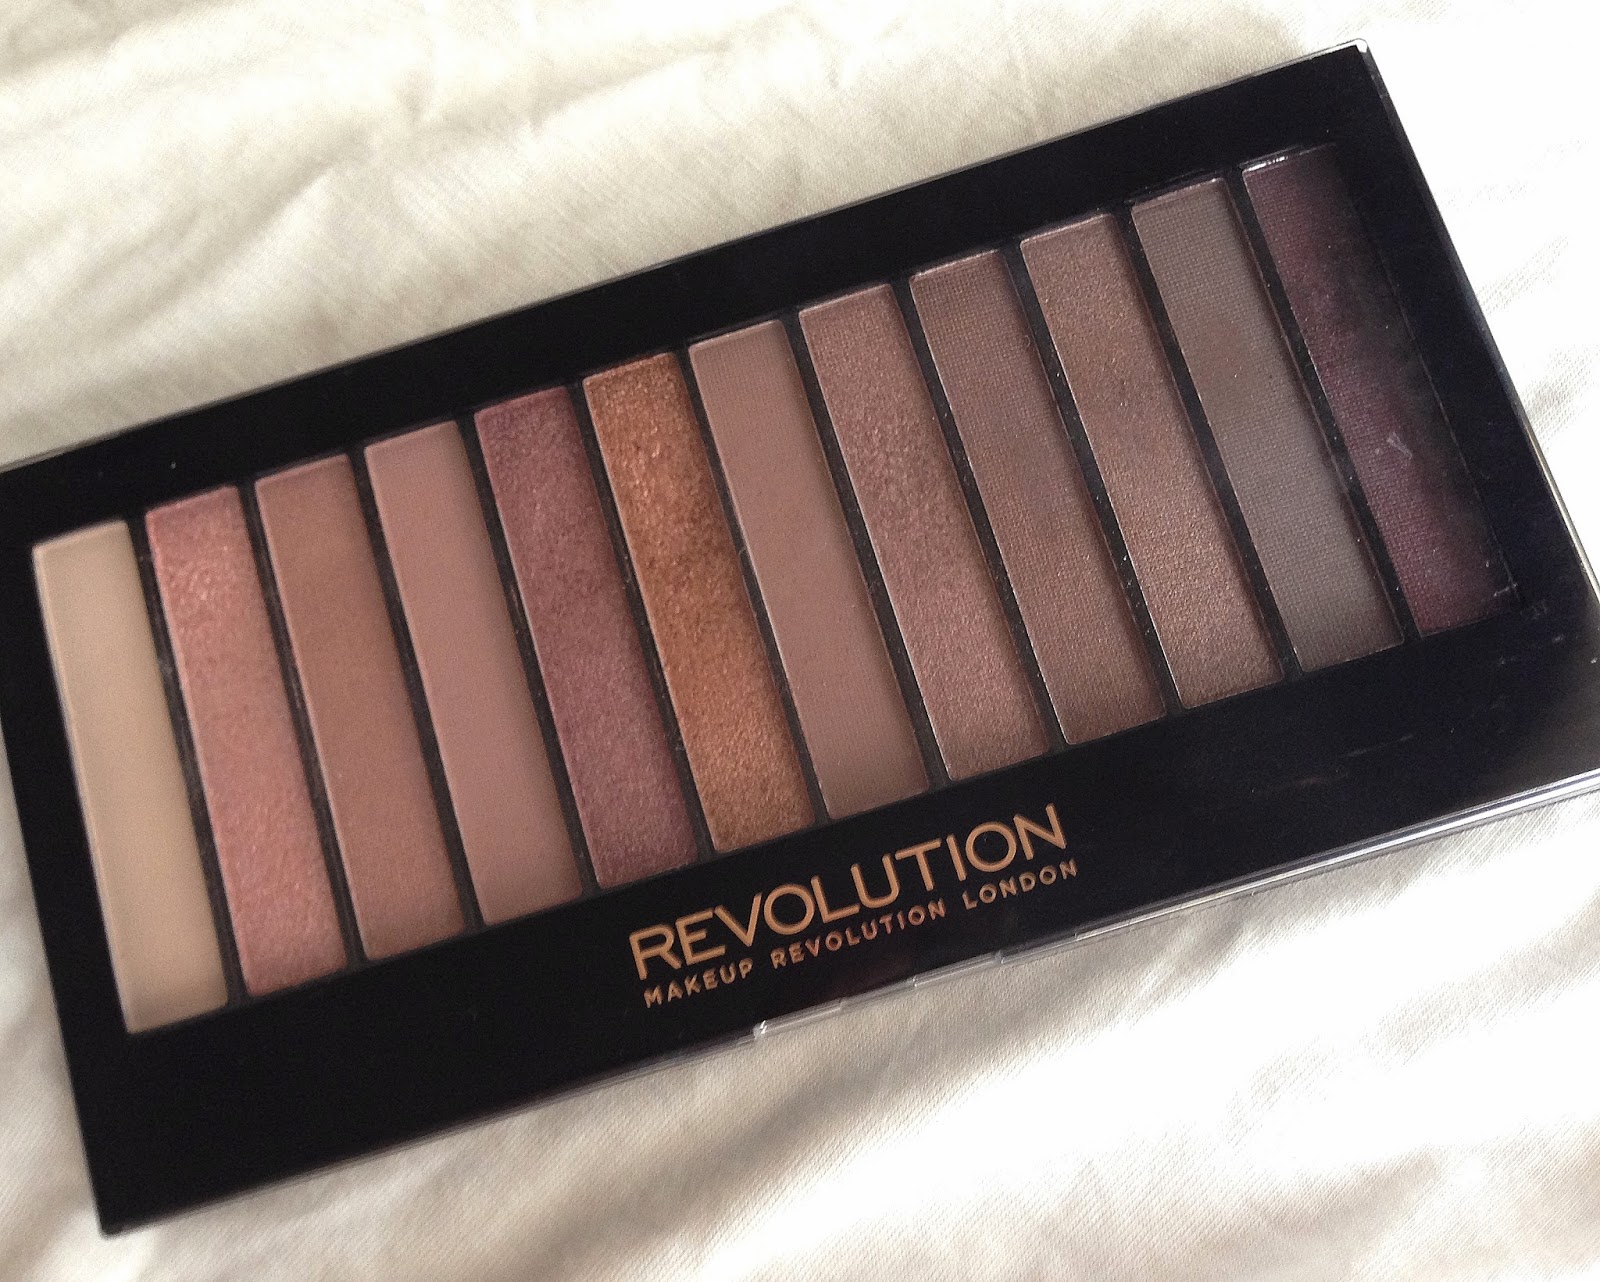 Makeup revolution iconic 3 review